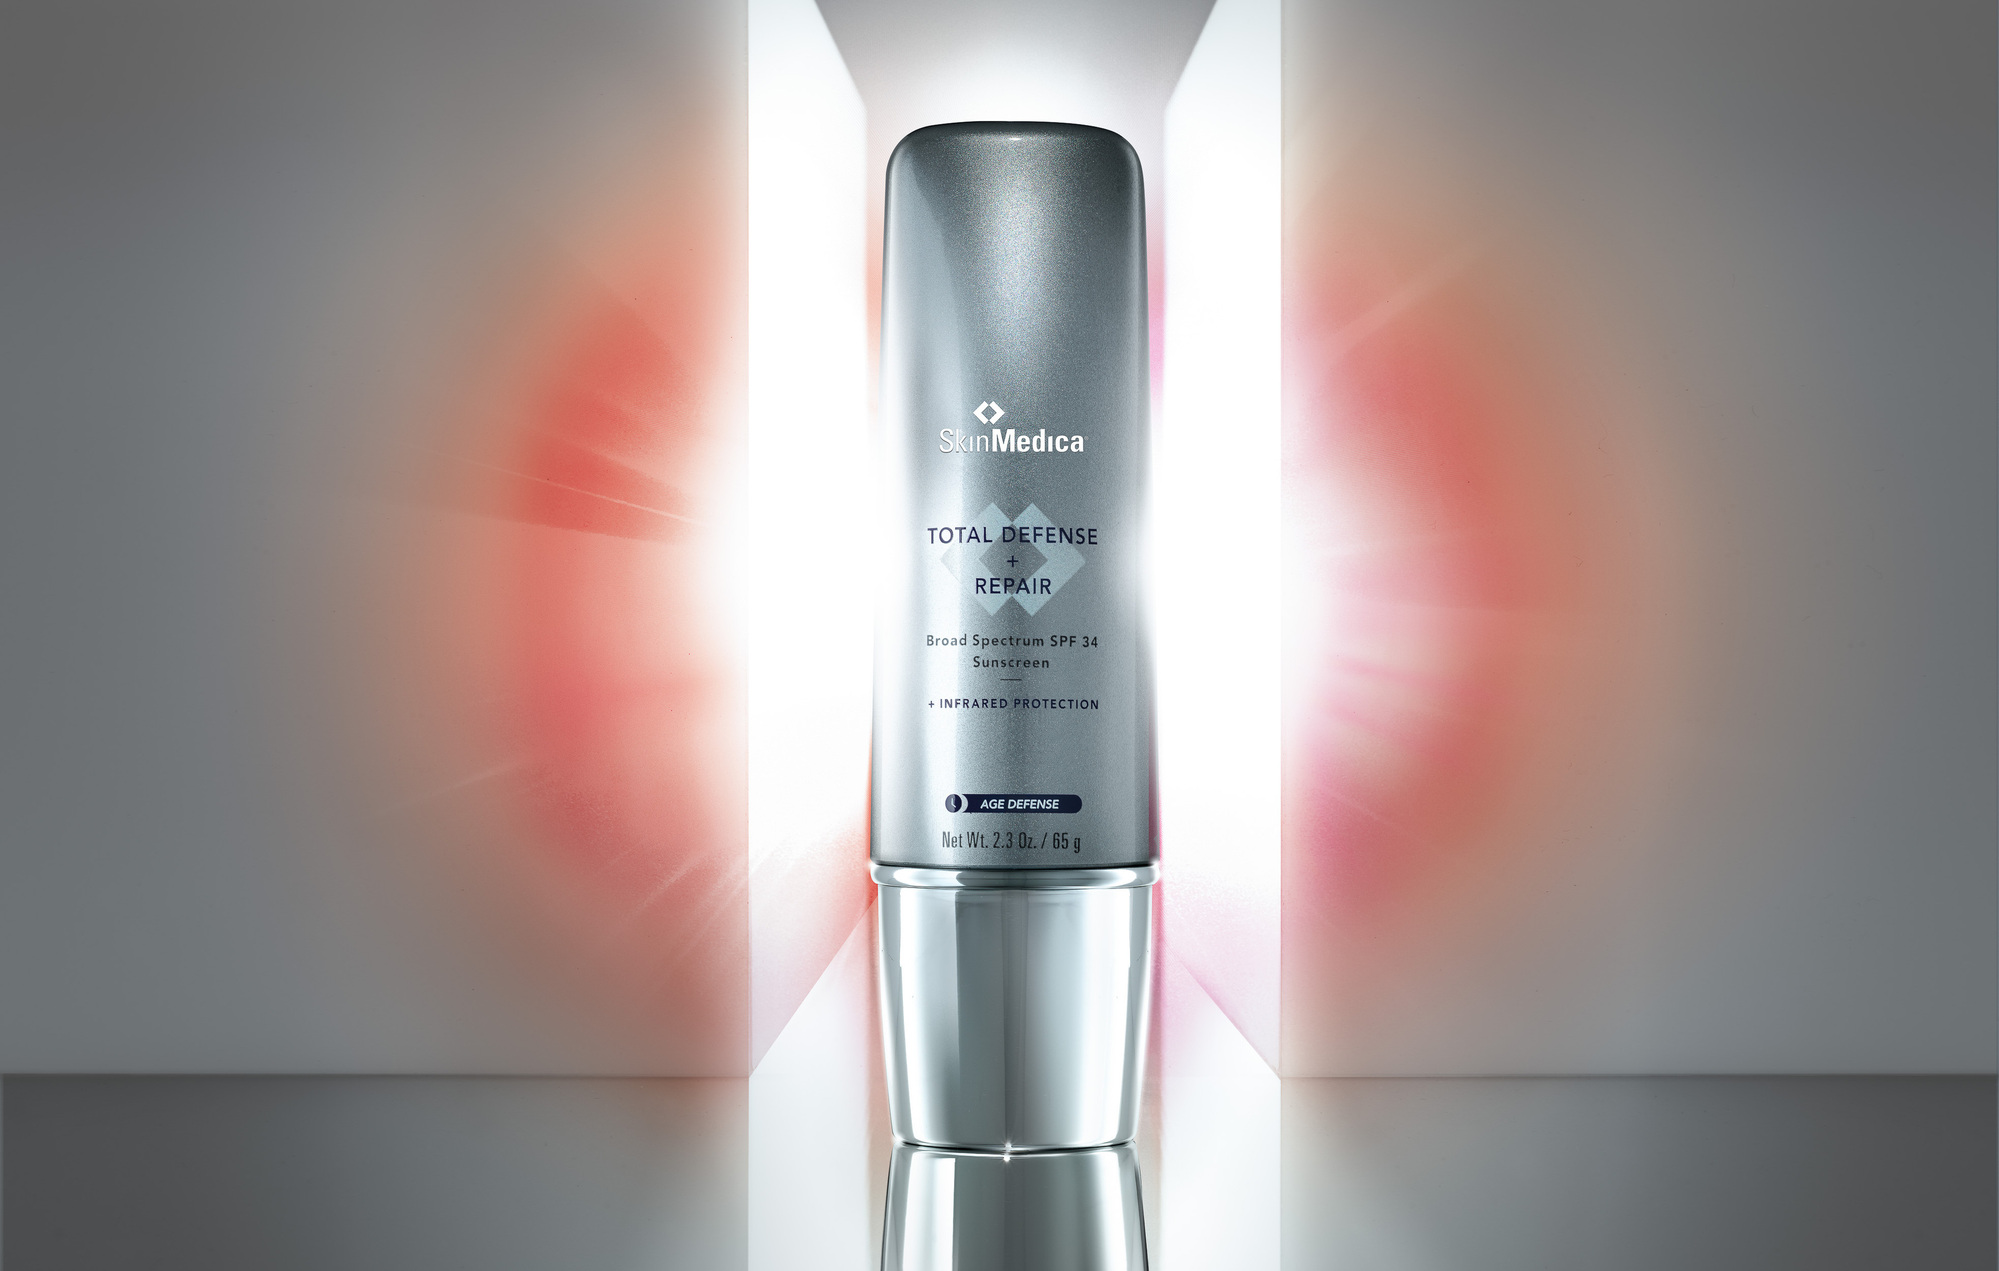 Skinmedica cosmetics and beauty photography by commercial, product & advertising photographer Timothy Hogan in the Los Angeles Studio